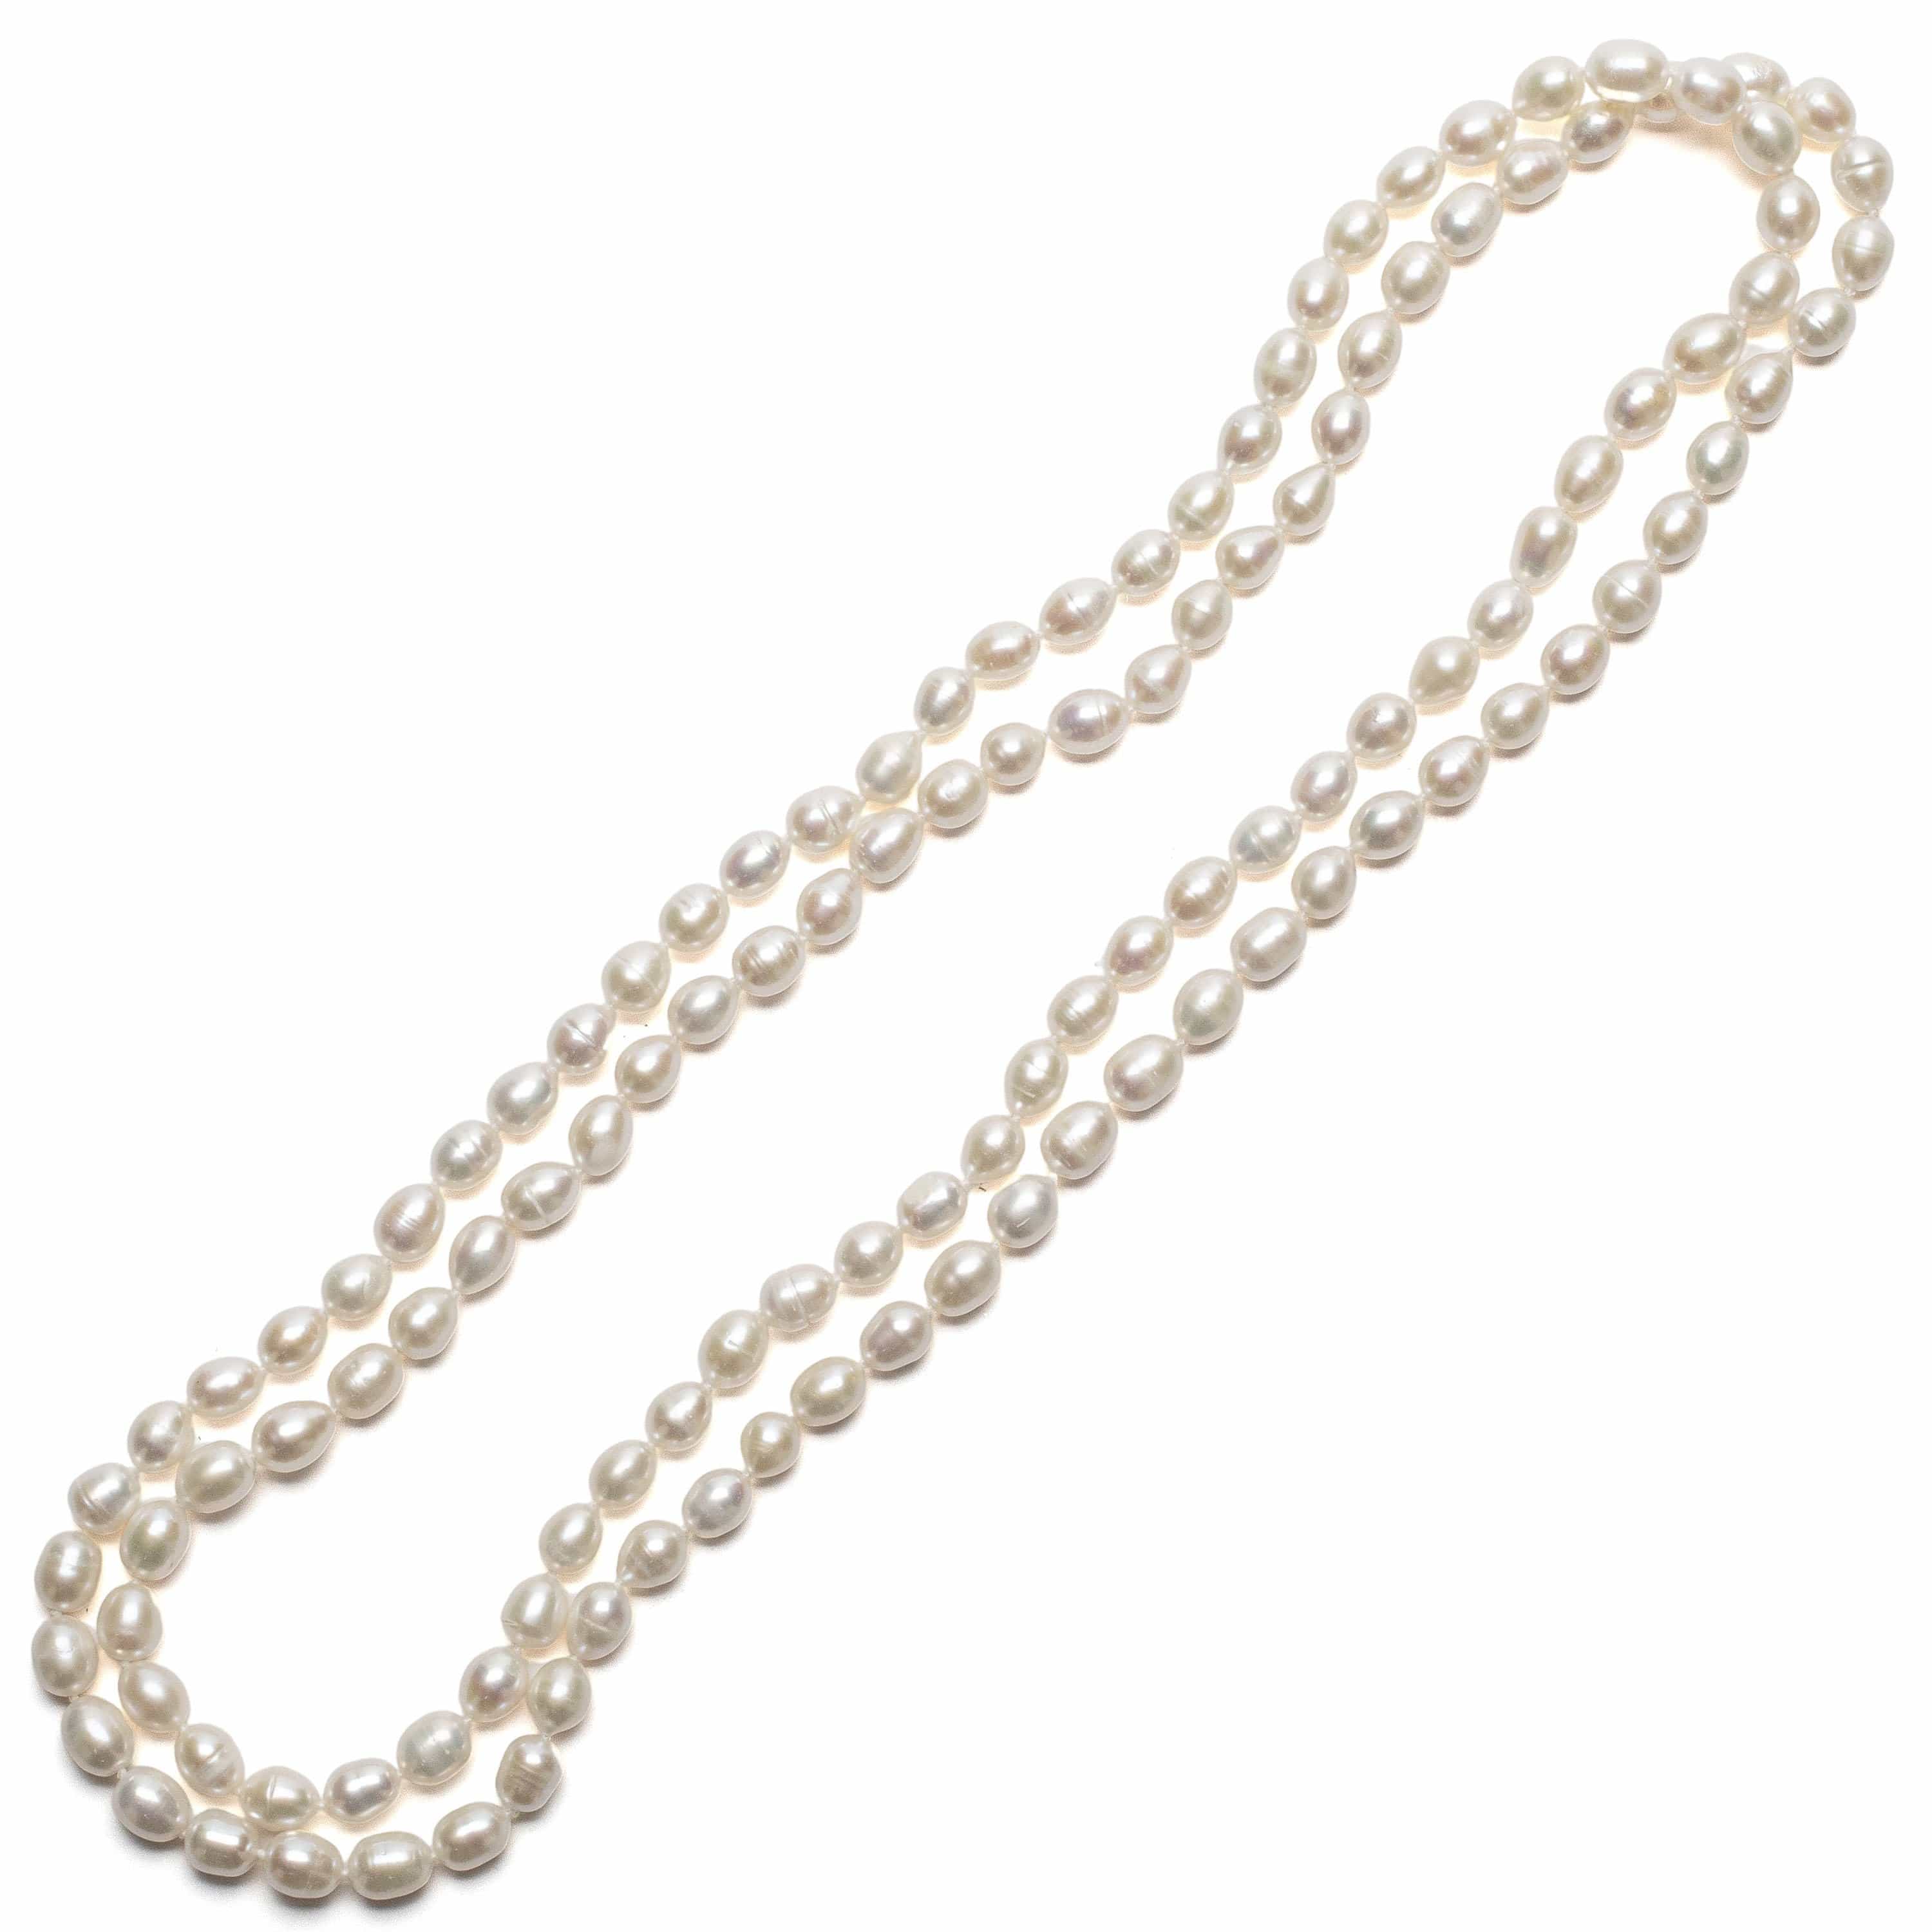 Natural Fresh-Water Cultured Pearl Necklace